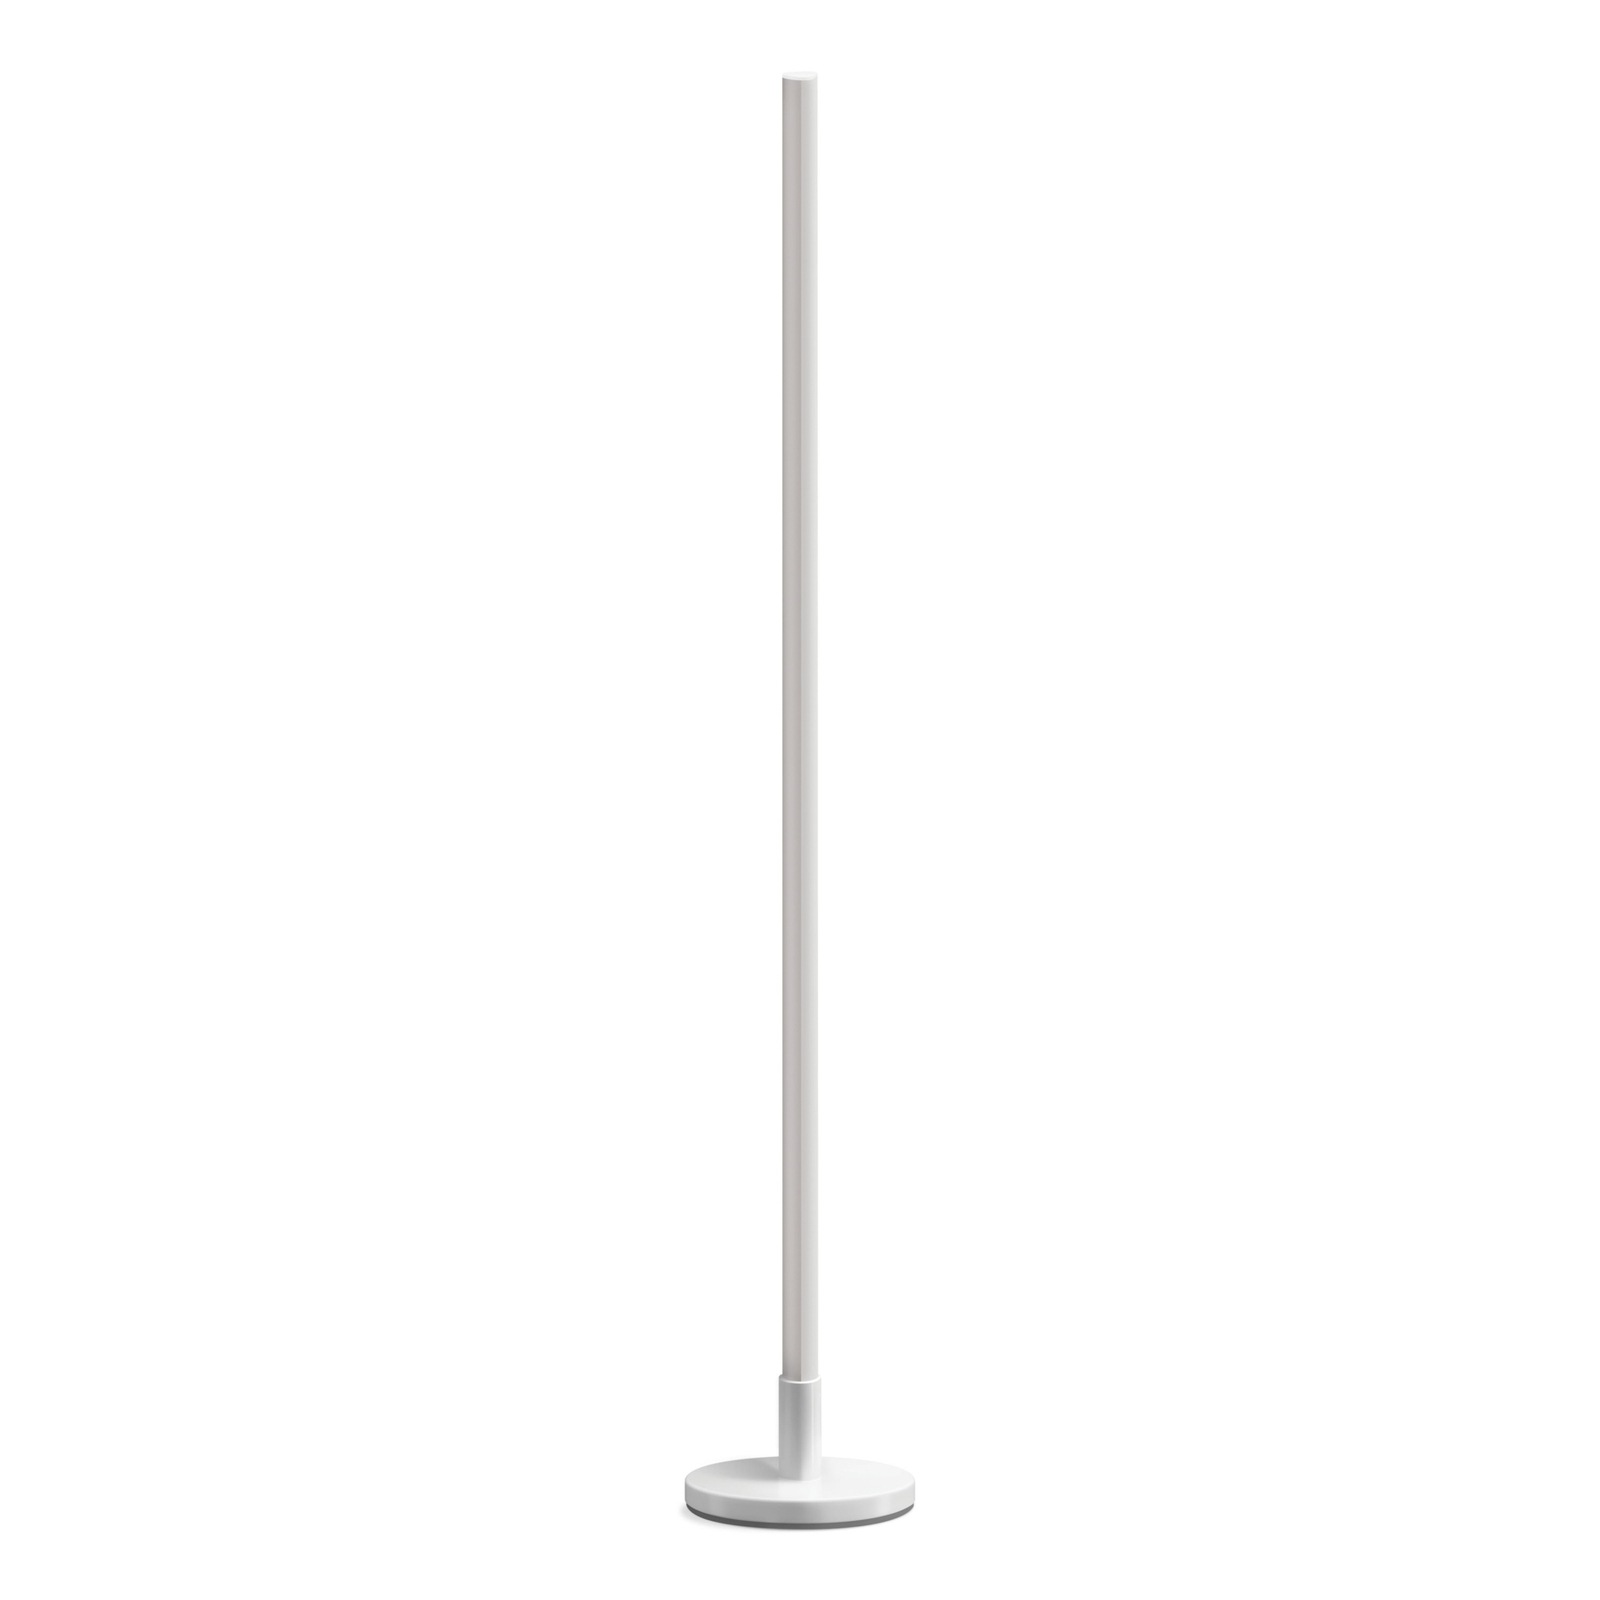 WiZ LED floor lamp Pole, Tunable White and Colour